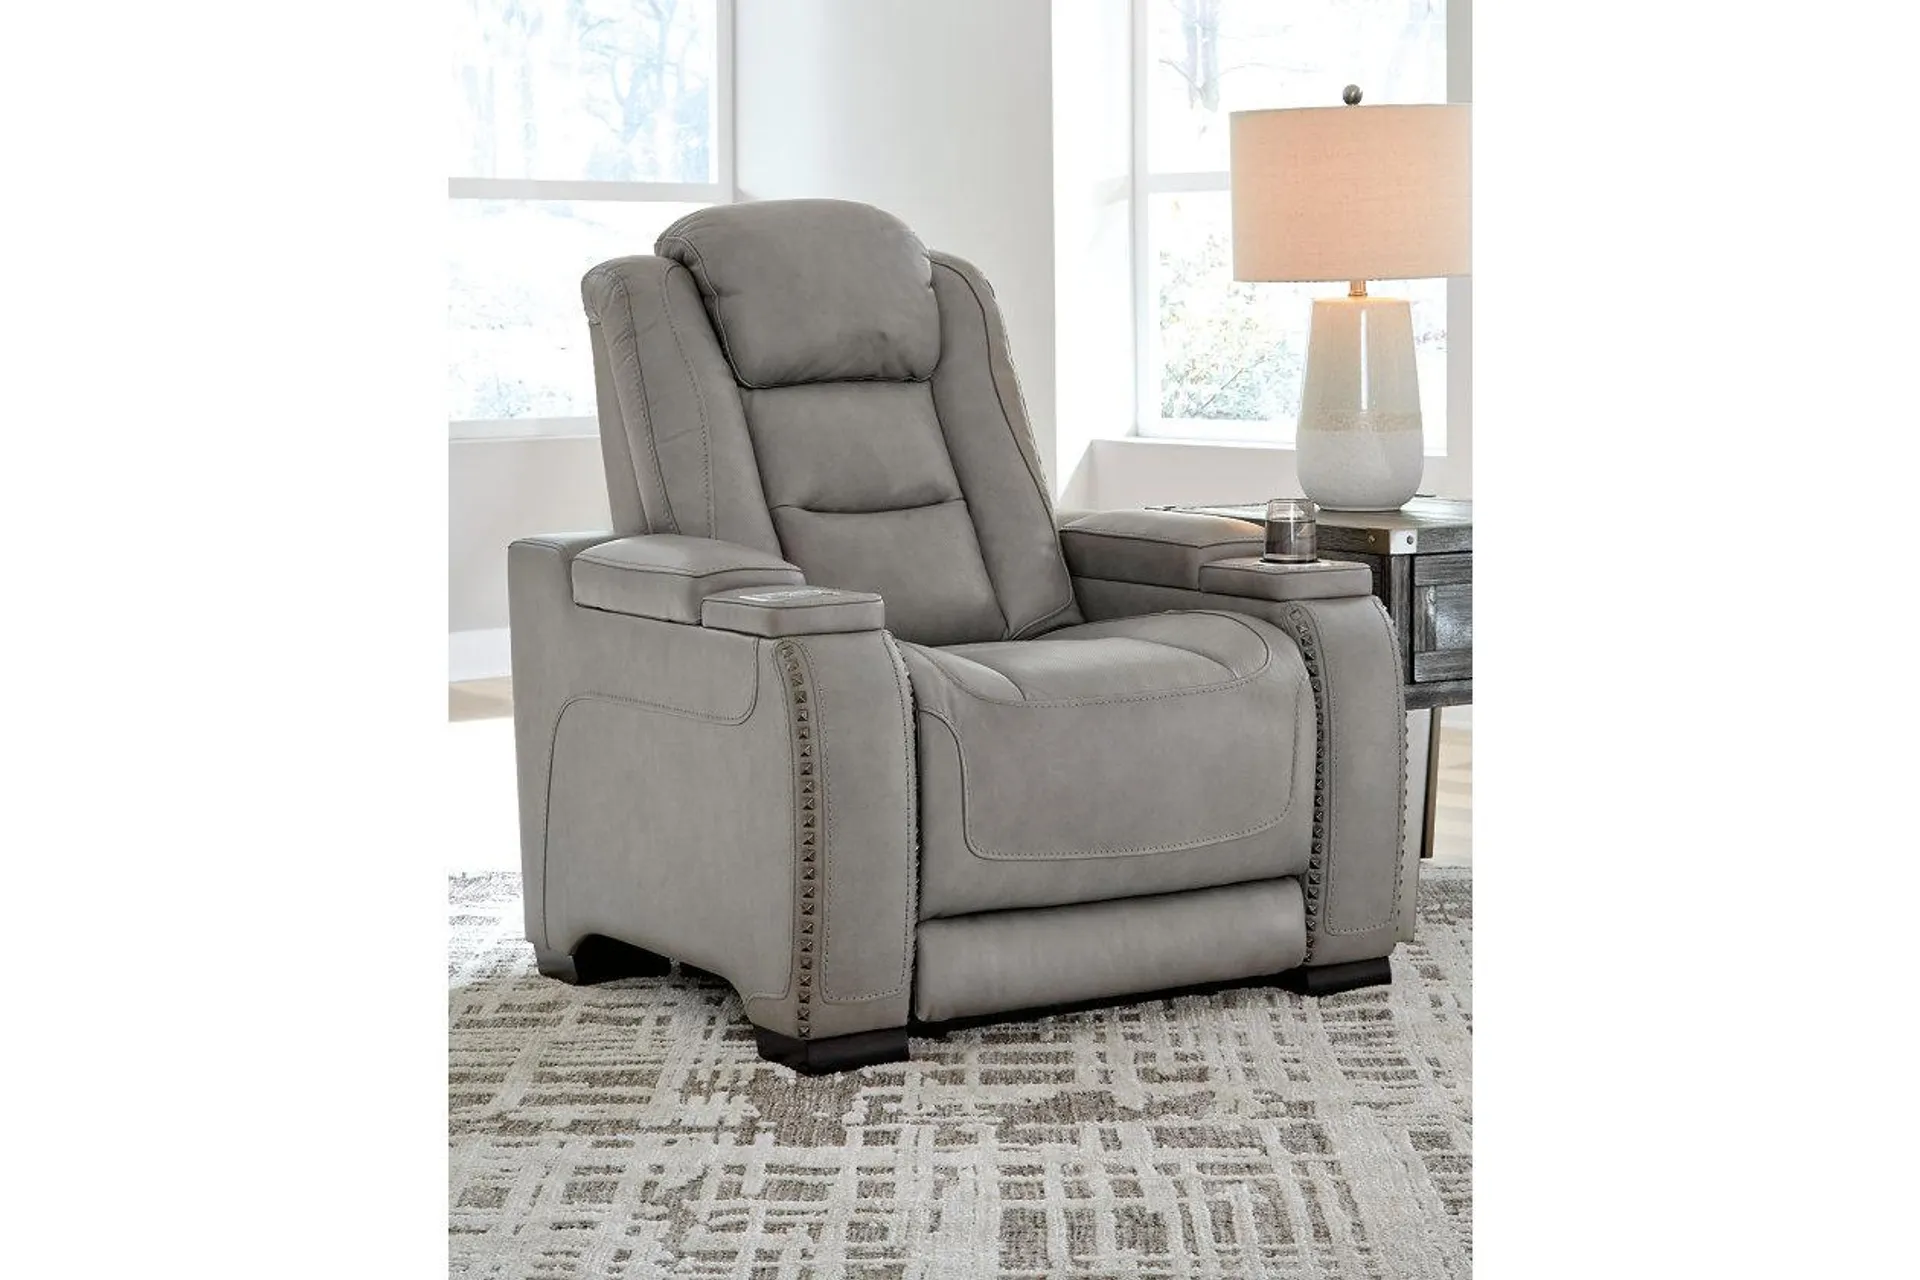 The Man-Den Triple Power Leather Recliner